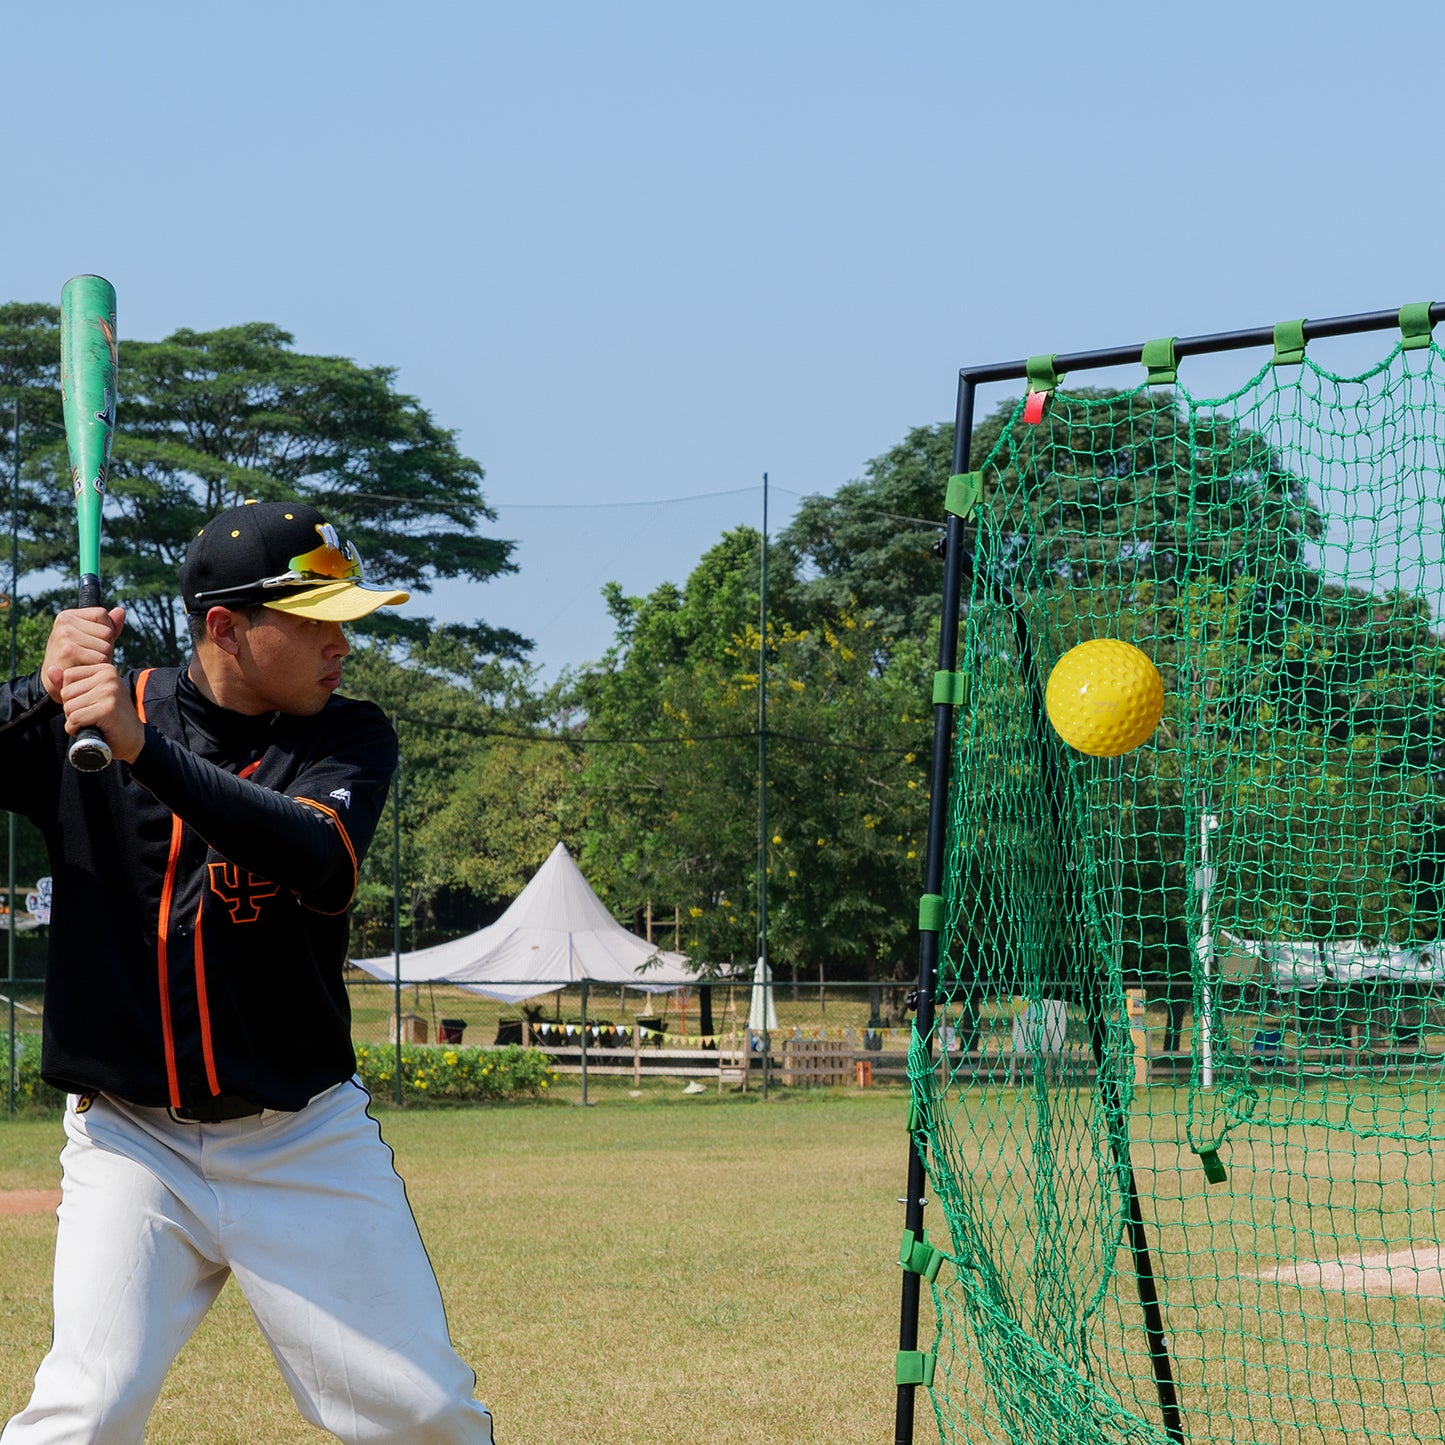 Furlihong 12-Inch Sting-Free Dimpled Training Softballs Only For 6902BHA